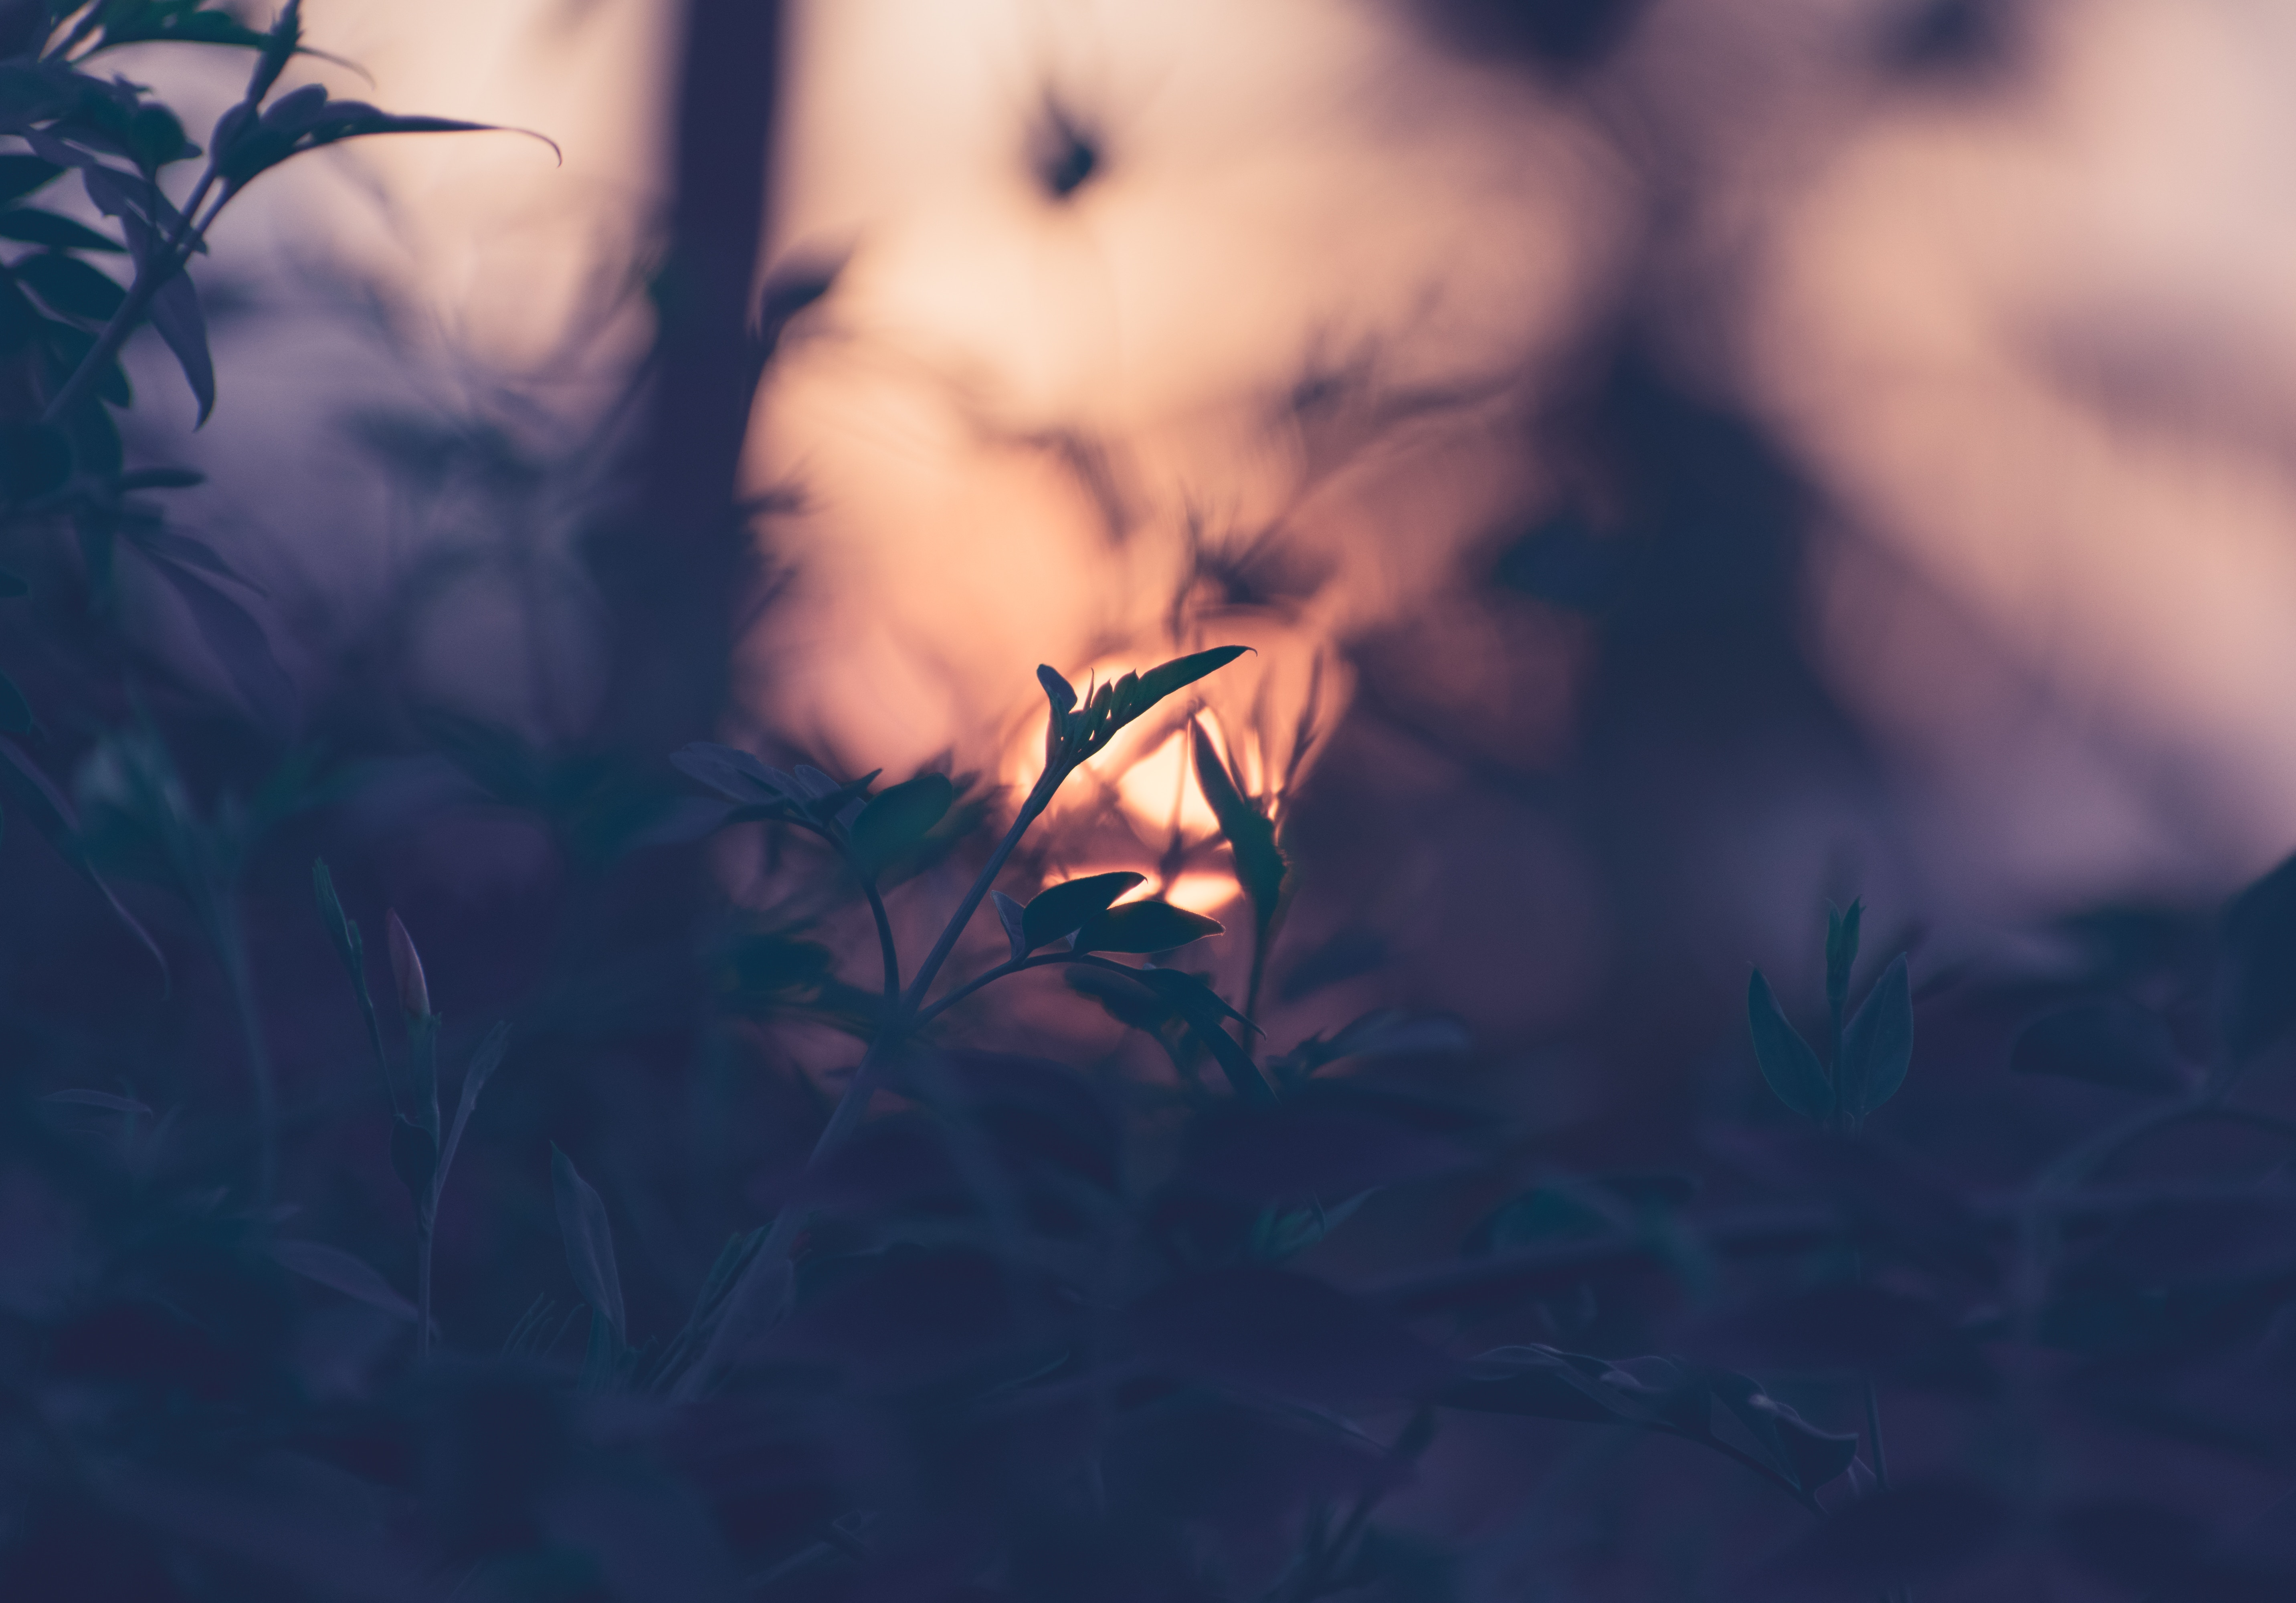 smooth, blur, sunset, leaves, plant, macro, branches Full HD